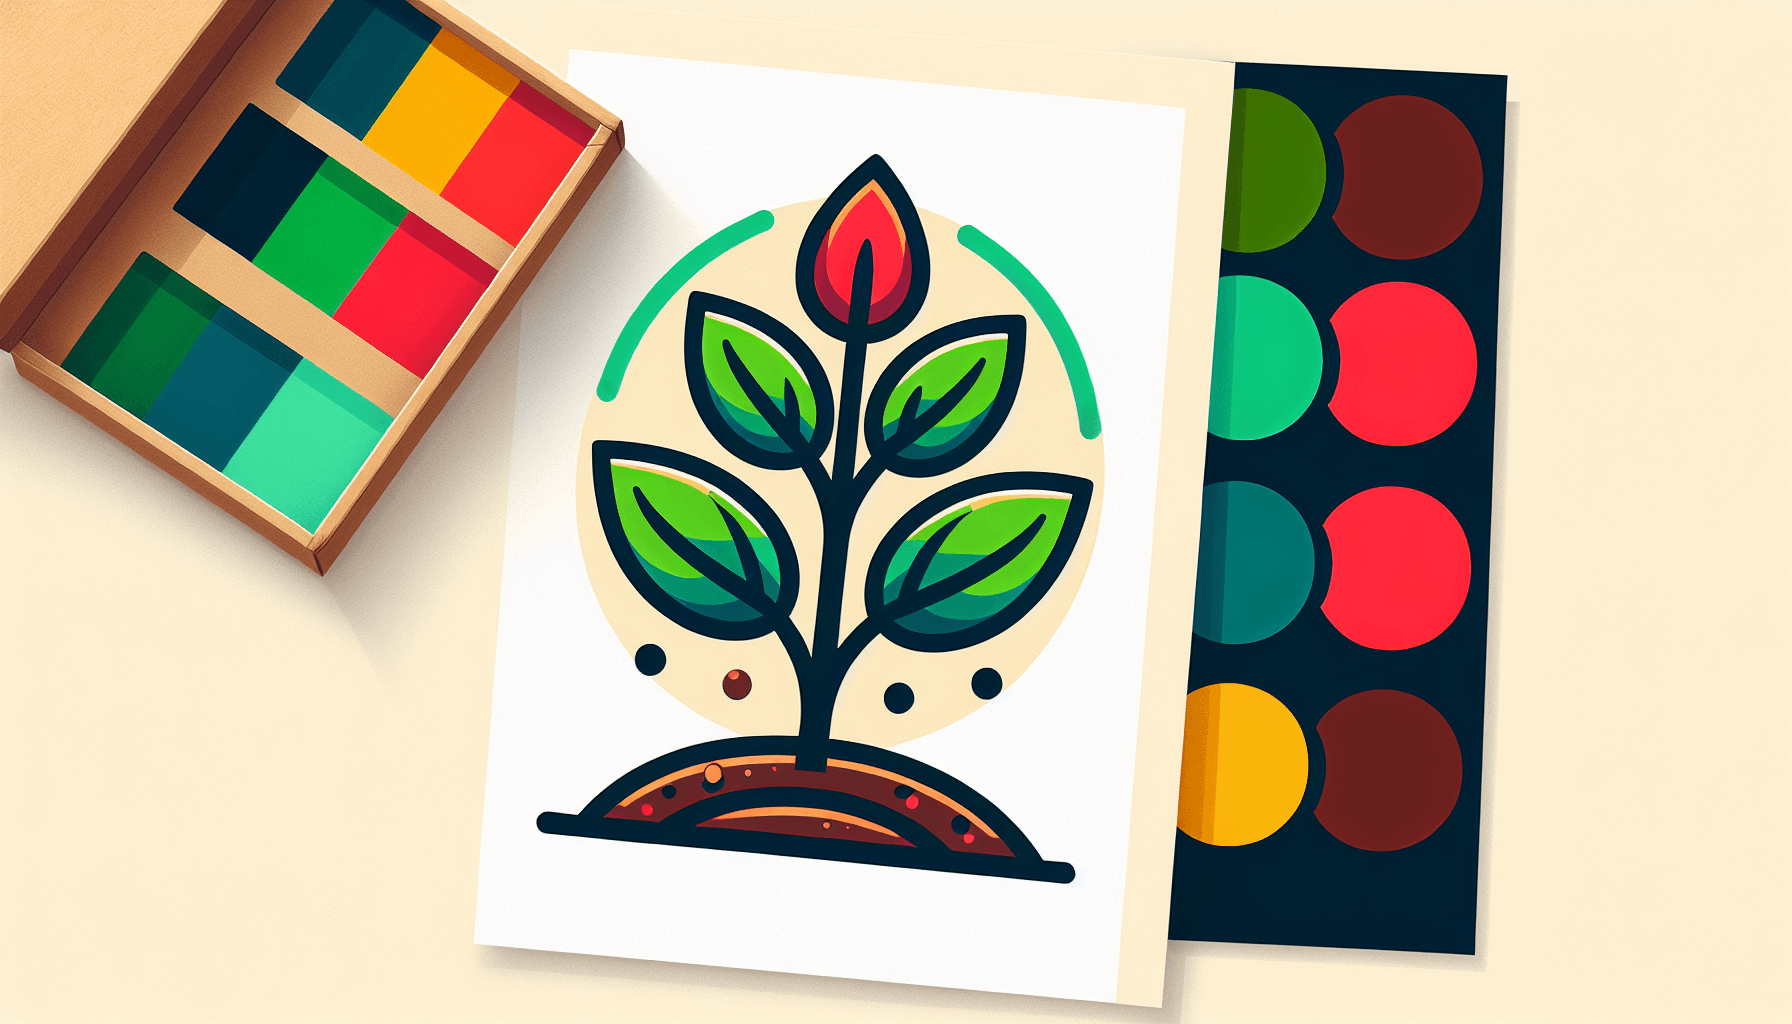 Seedling in flat illustration style and white background, red #f47574, green #88c7a8, yellow #fcc44b, and blue #645bc8 colors.